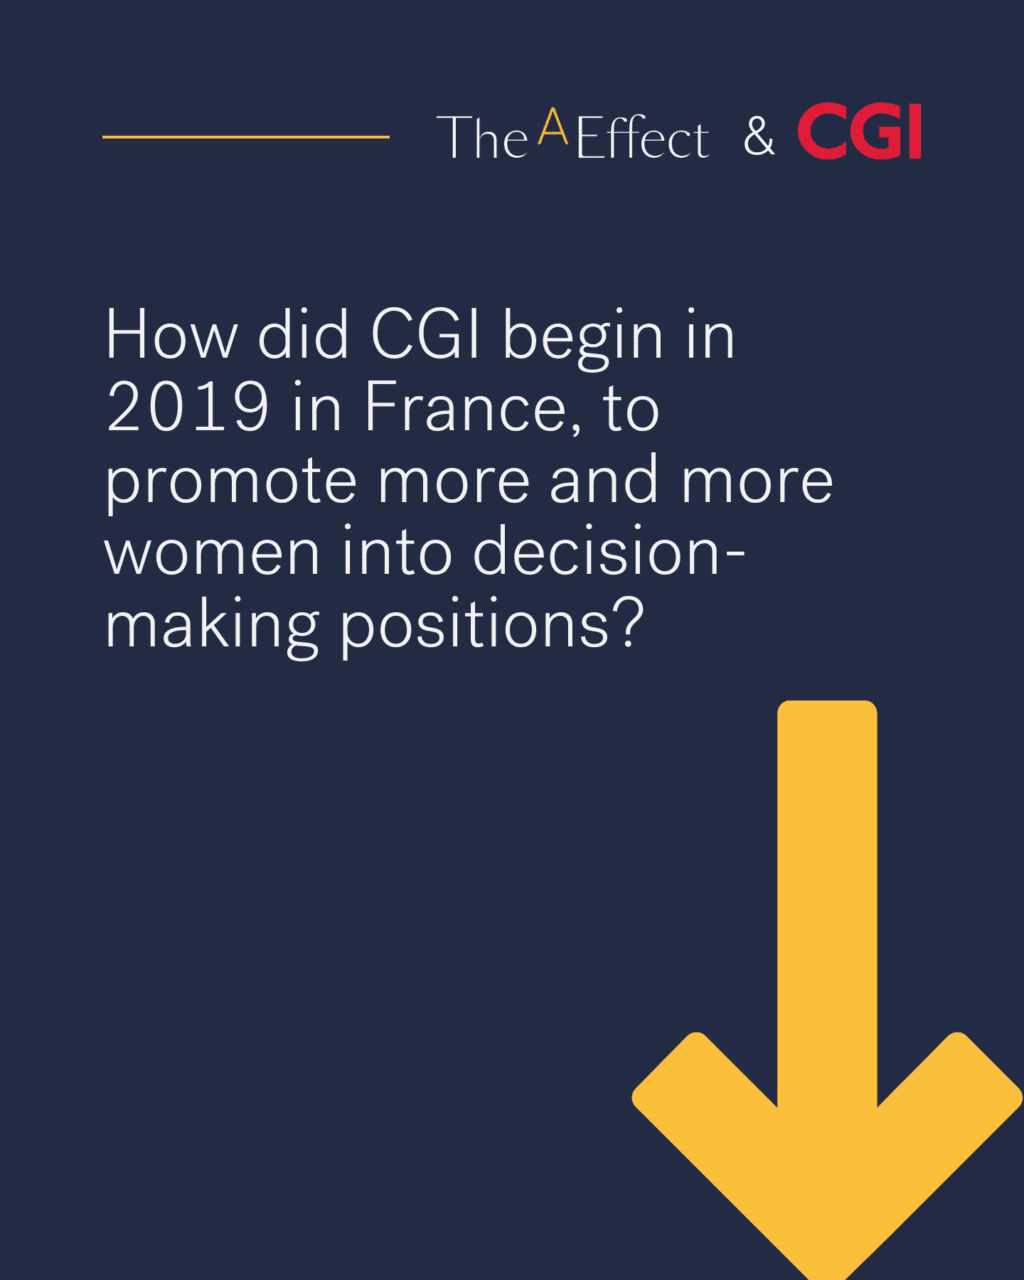 How did CGI begin in 2019 in France, to promote more and more women into decision-making positions?